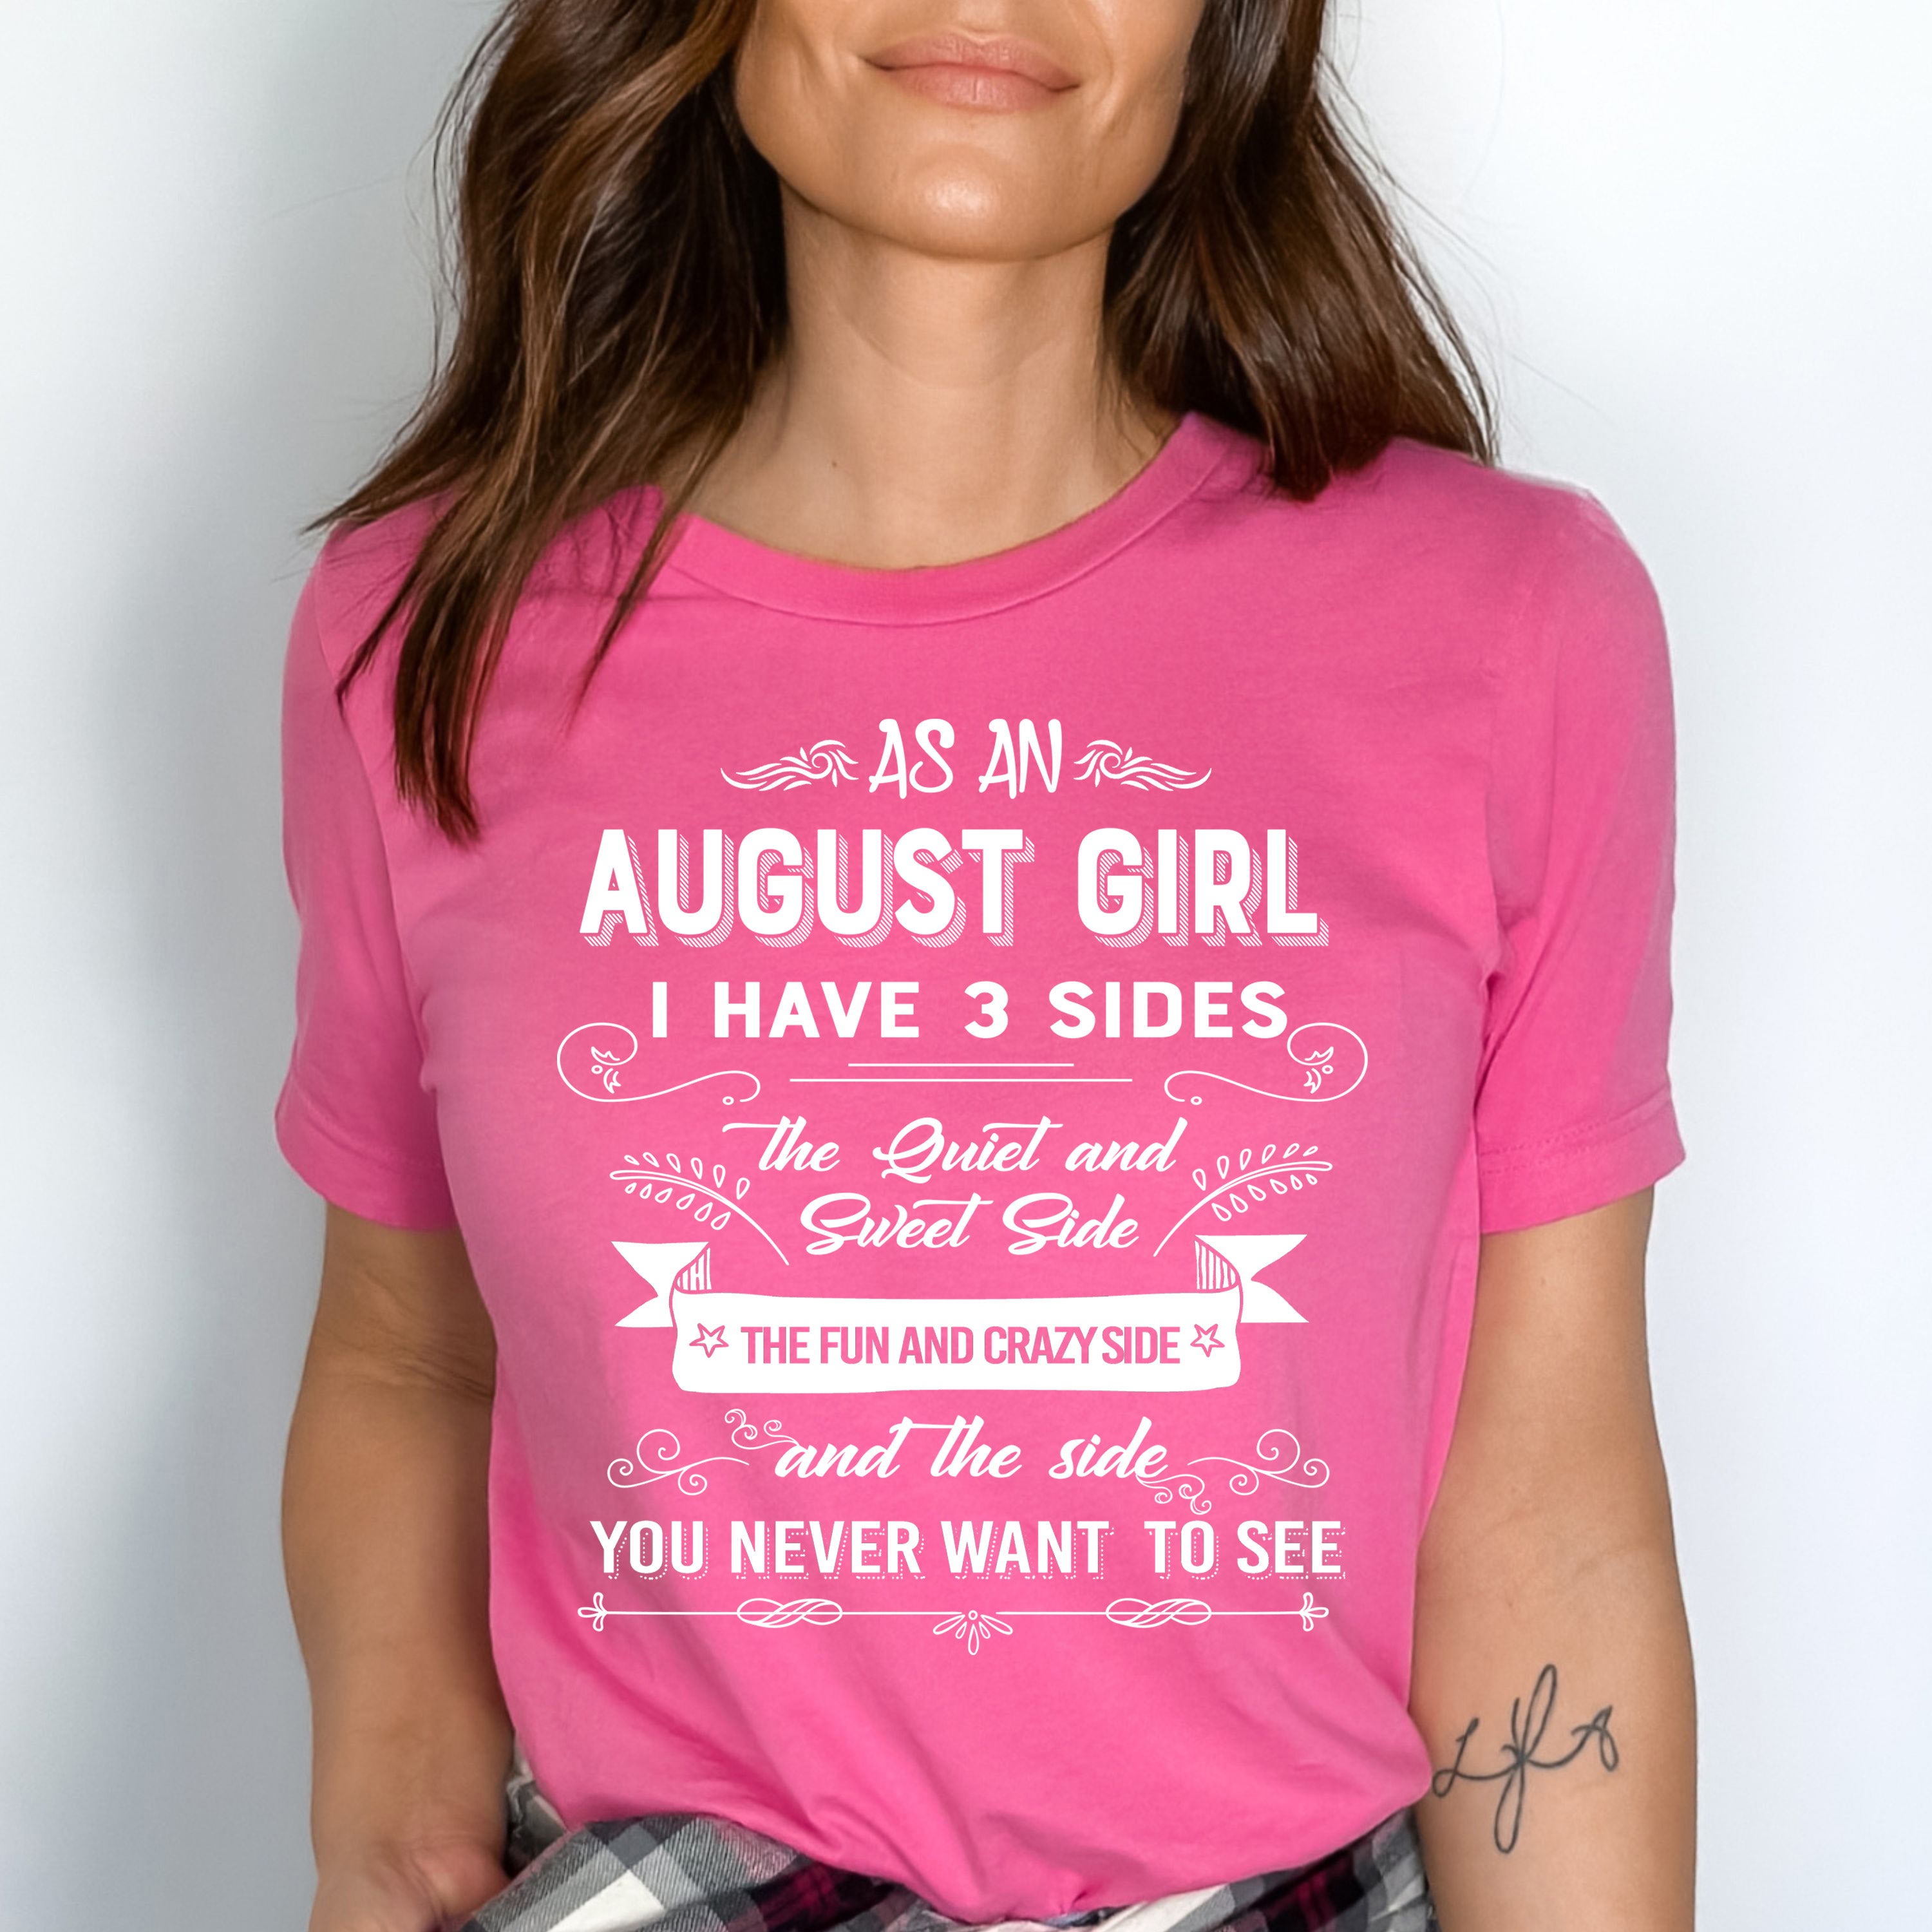 "As a August Girl I have 3 Sides"